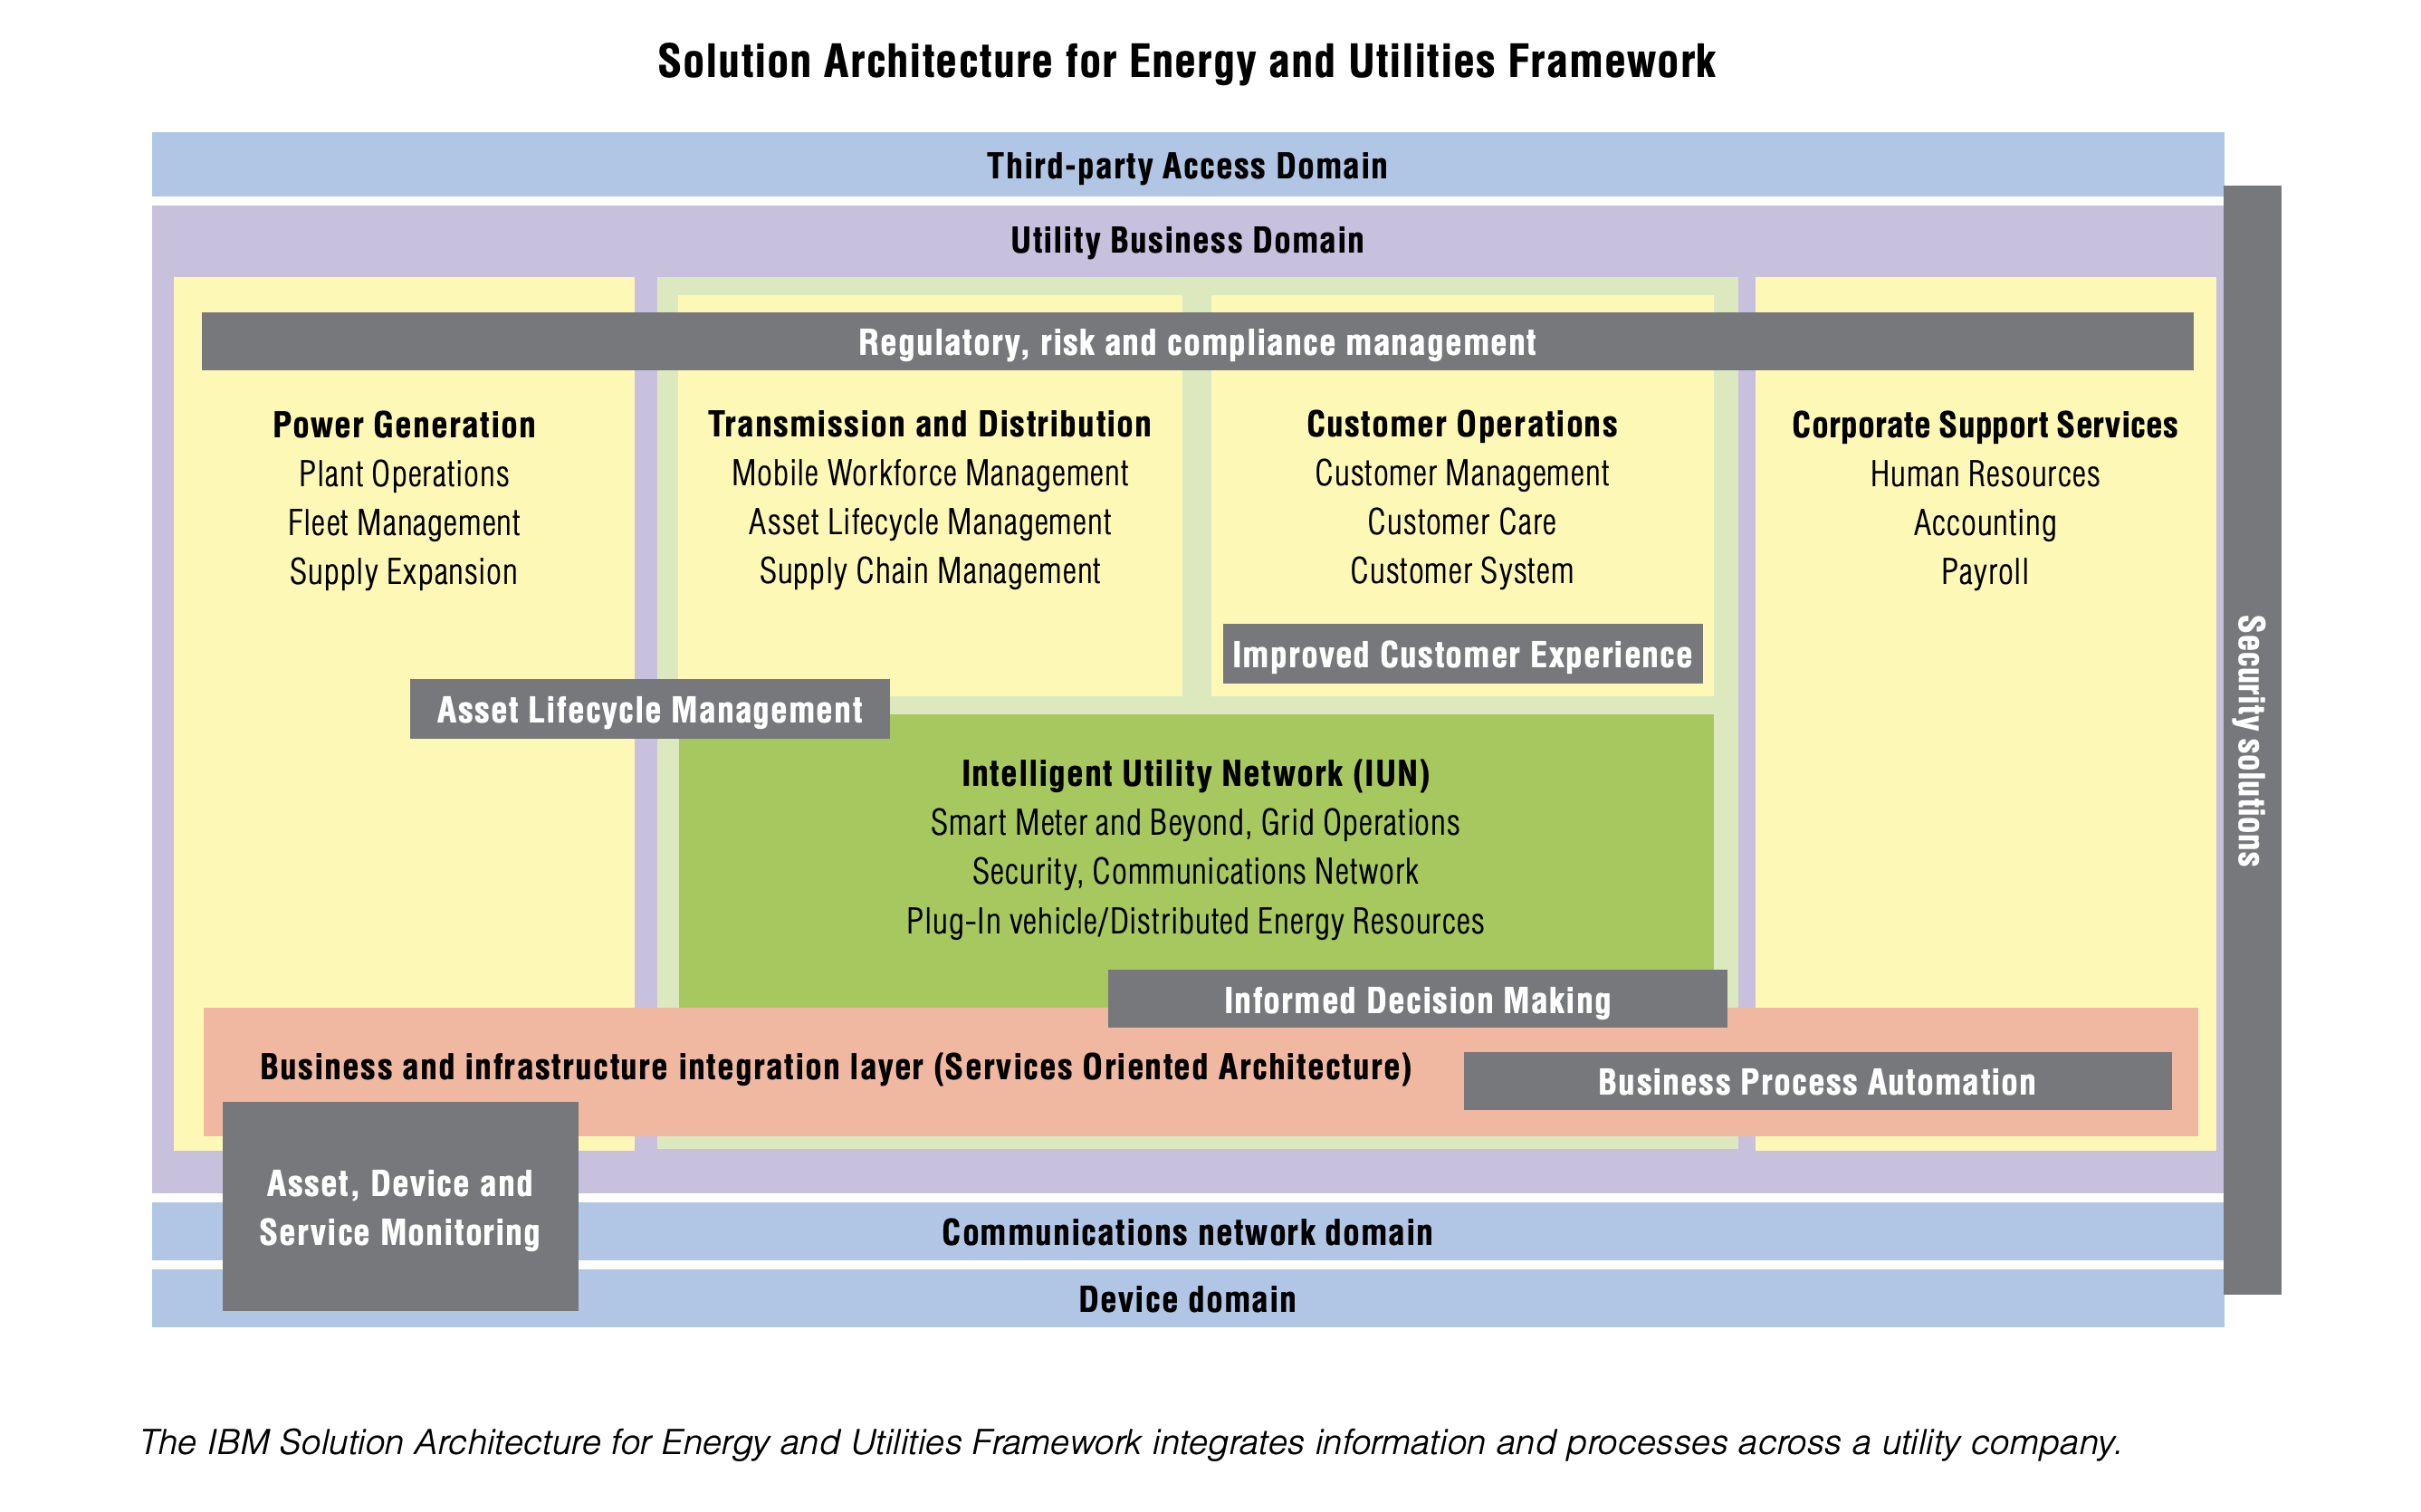 Solution Architecture Framework for the Energy industry